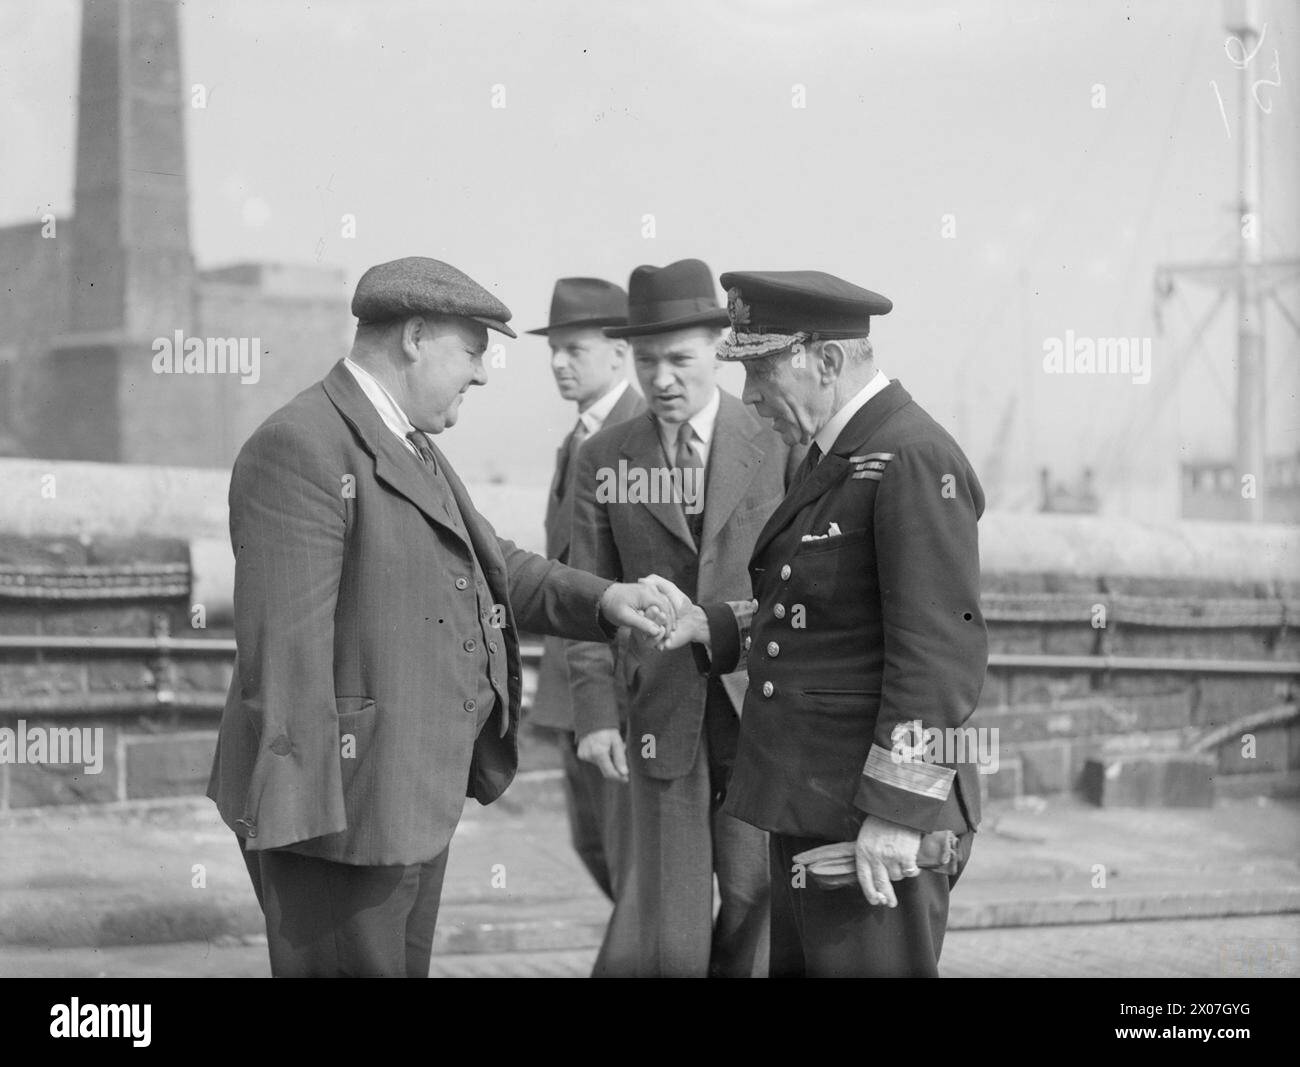 ADMIRAL MEETS BRITAIN'S SHIP REPAIRERS. 19 AND 20 SEPTEMBER 1944, AT VARIOUS DOCKYARDS IN LIVERPOOL. THE VISIT OF ADMIRAL SIR ARTHUR J DAVIES, KBE, CB, RN, RET'D, WEARING THE RANK OF COMMODORE, RNR, TO THE SHIPYARDS. - Admiral Davies chatting with Mr Jack Hudson, who has seen 31 years service with Grayson, Rollo, and Glover. Hudson, responsible for oxygen containers, is known as 'Oxo Jack'. He lost an arm in accident Stock Photo